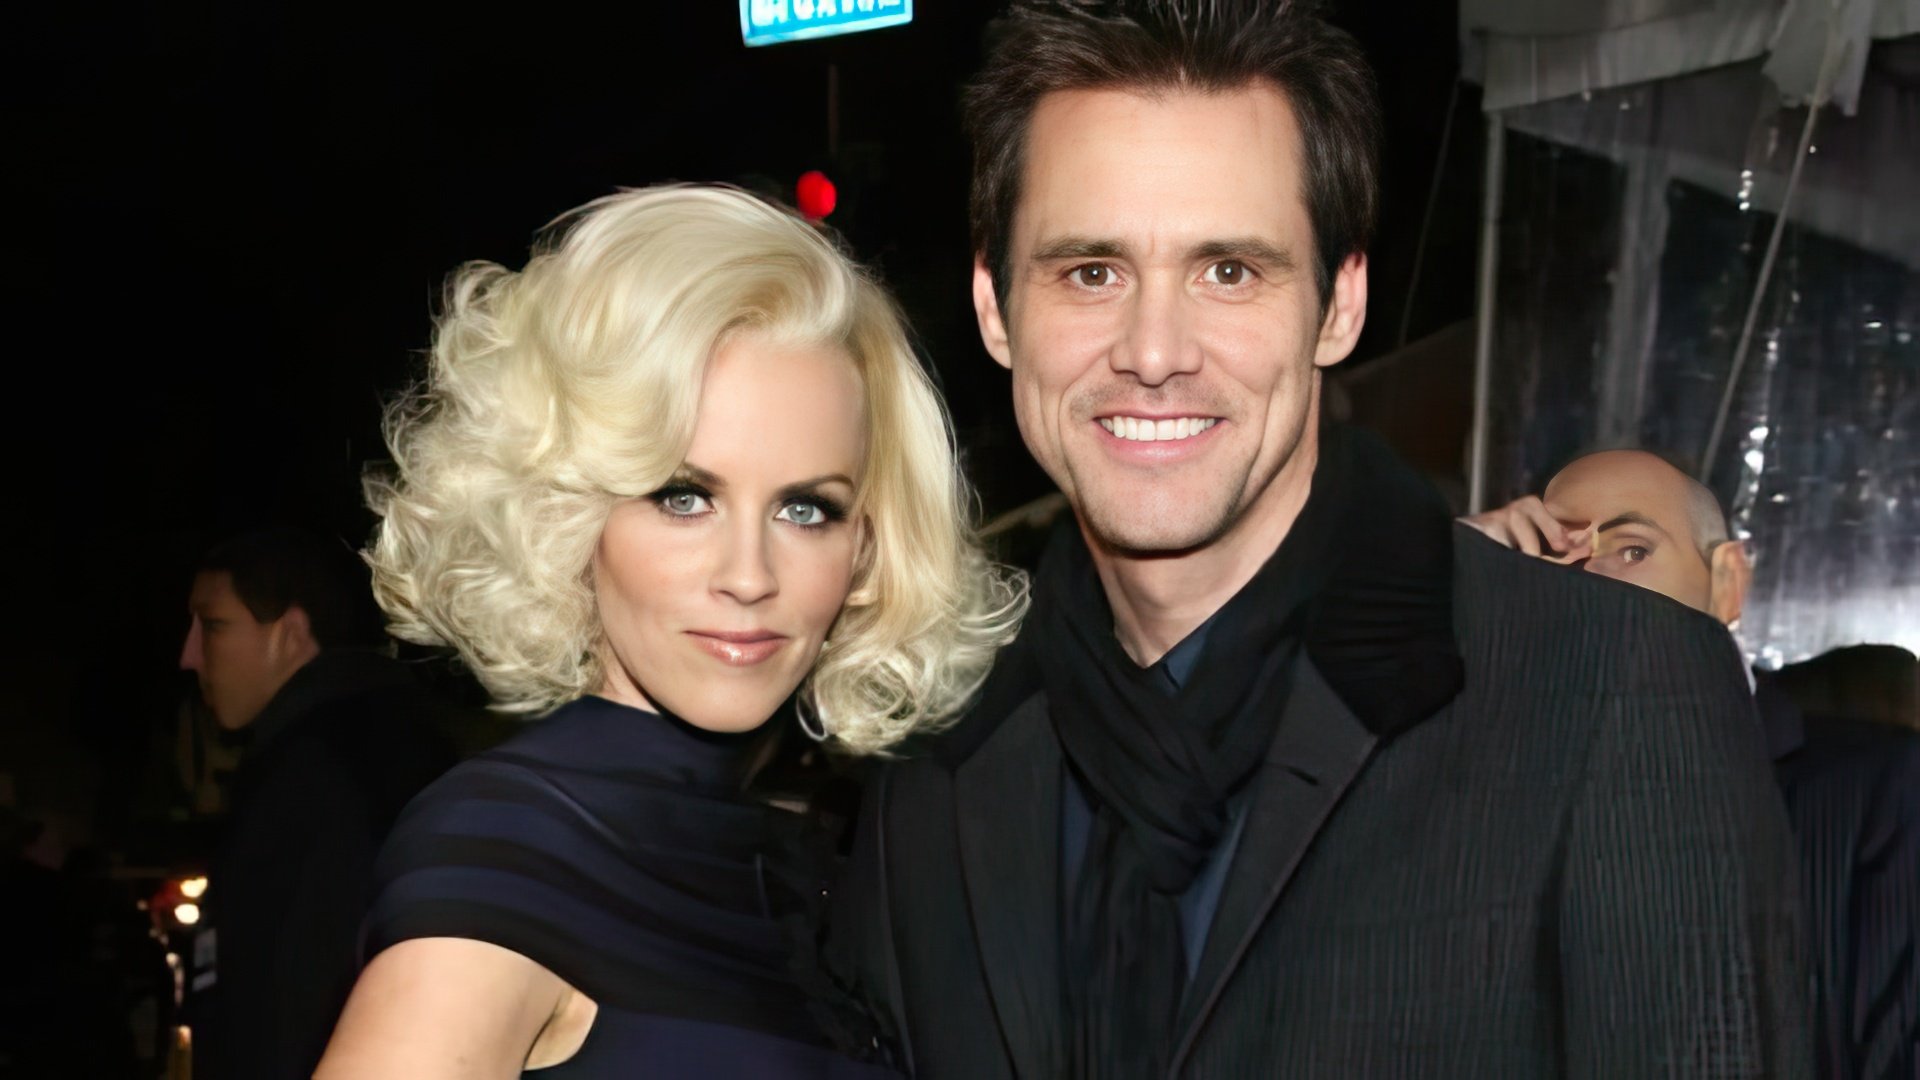 The actor still has warm relations with Jenny McCarthy